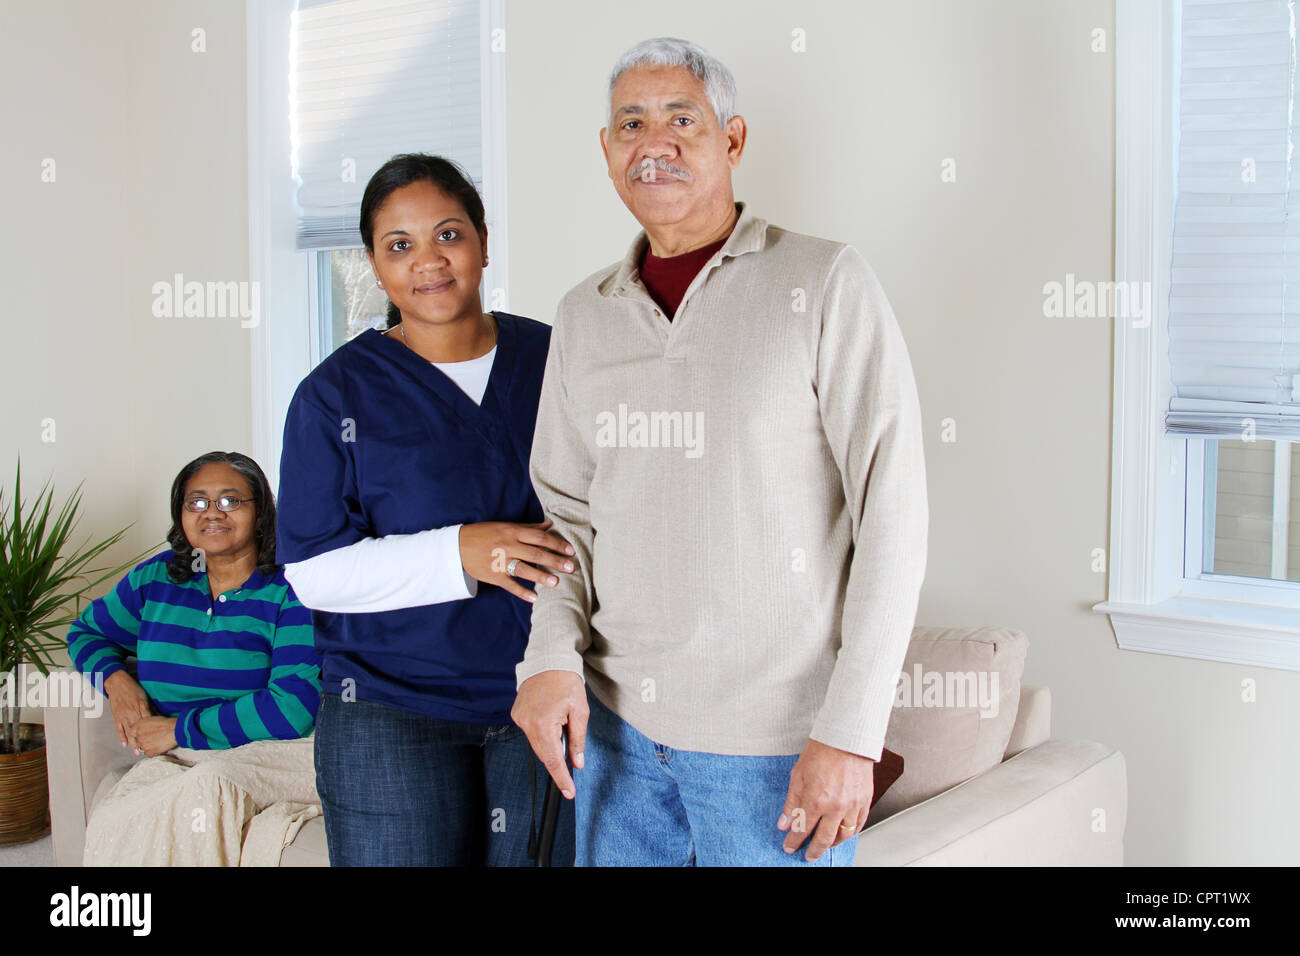 Home health care worker and an elderly couple Stock Photo